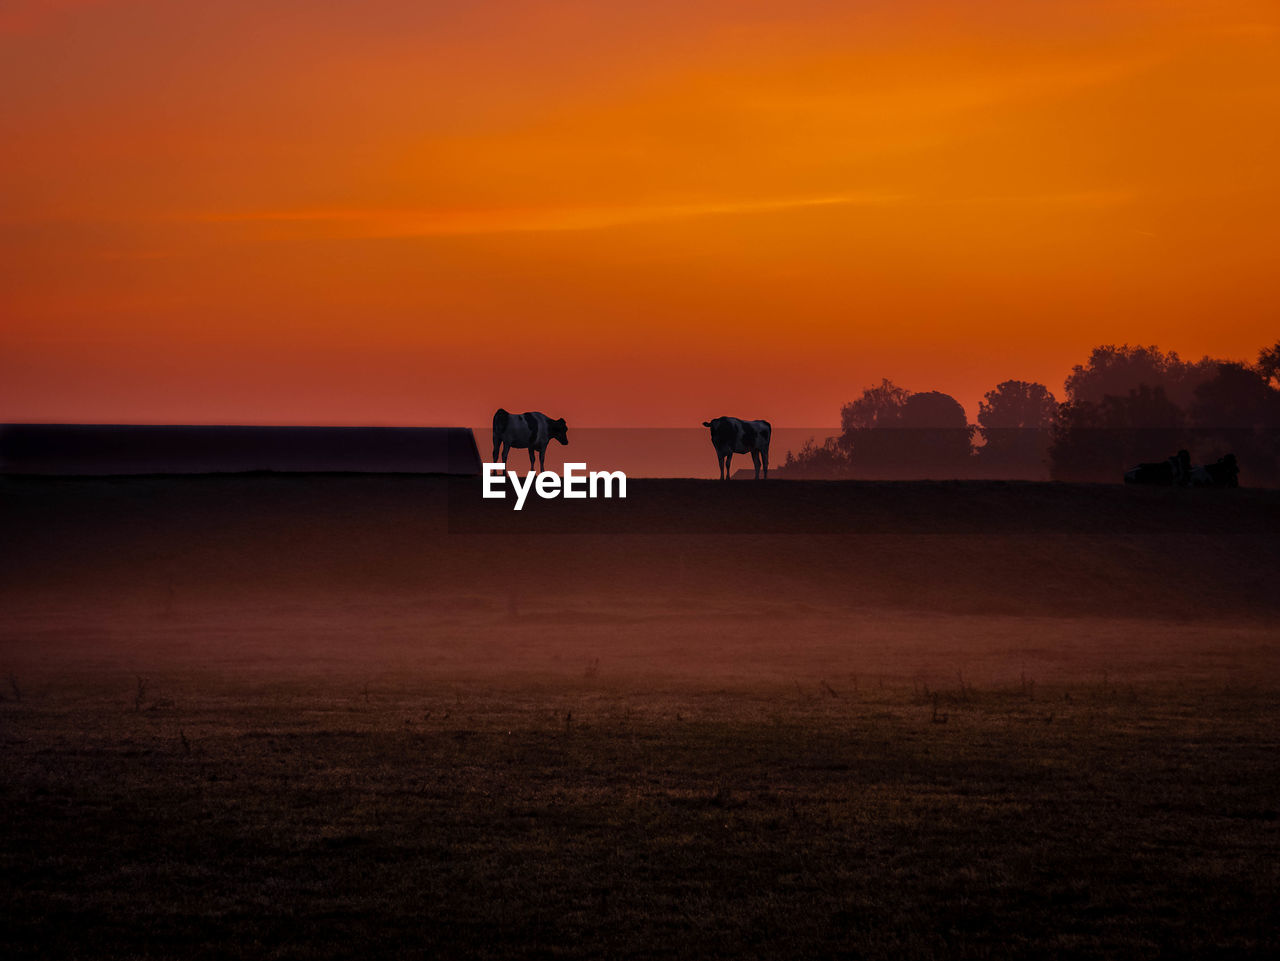 Silhouettes of two cows on a dyke overlooking fog covered meadows prior to sunrise